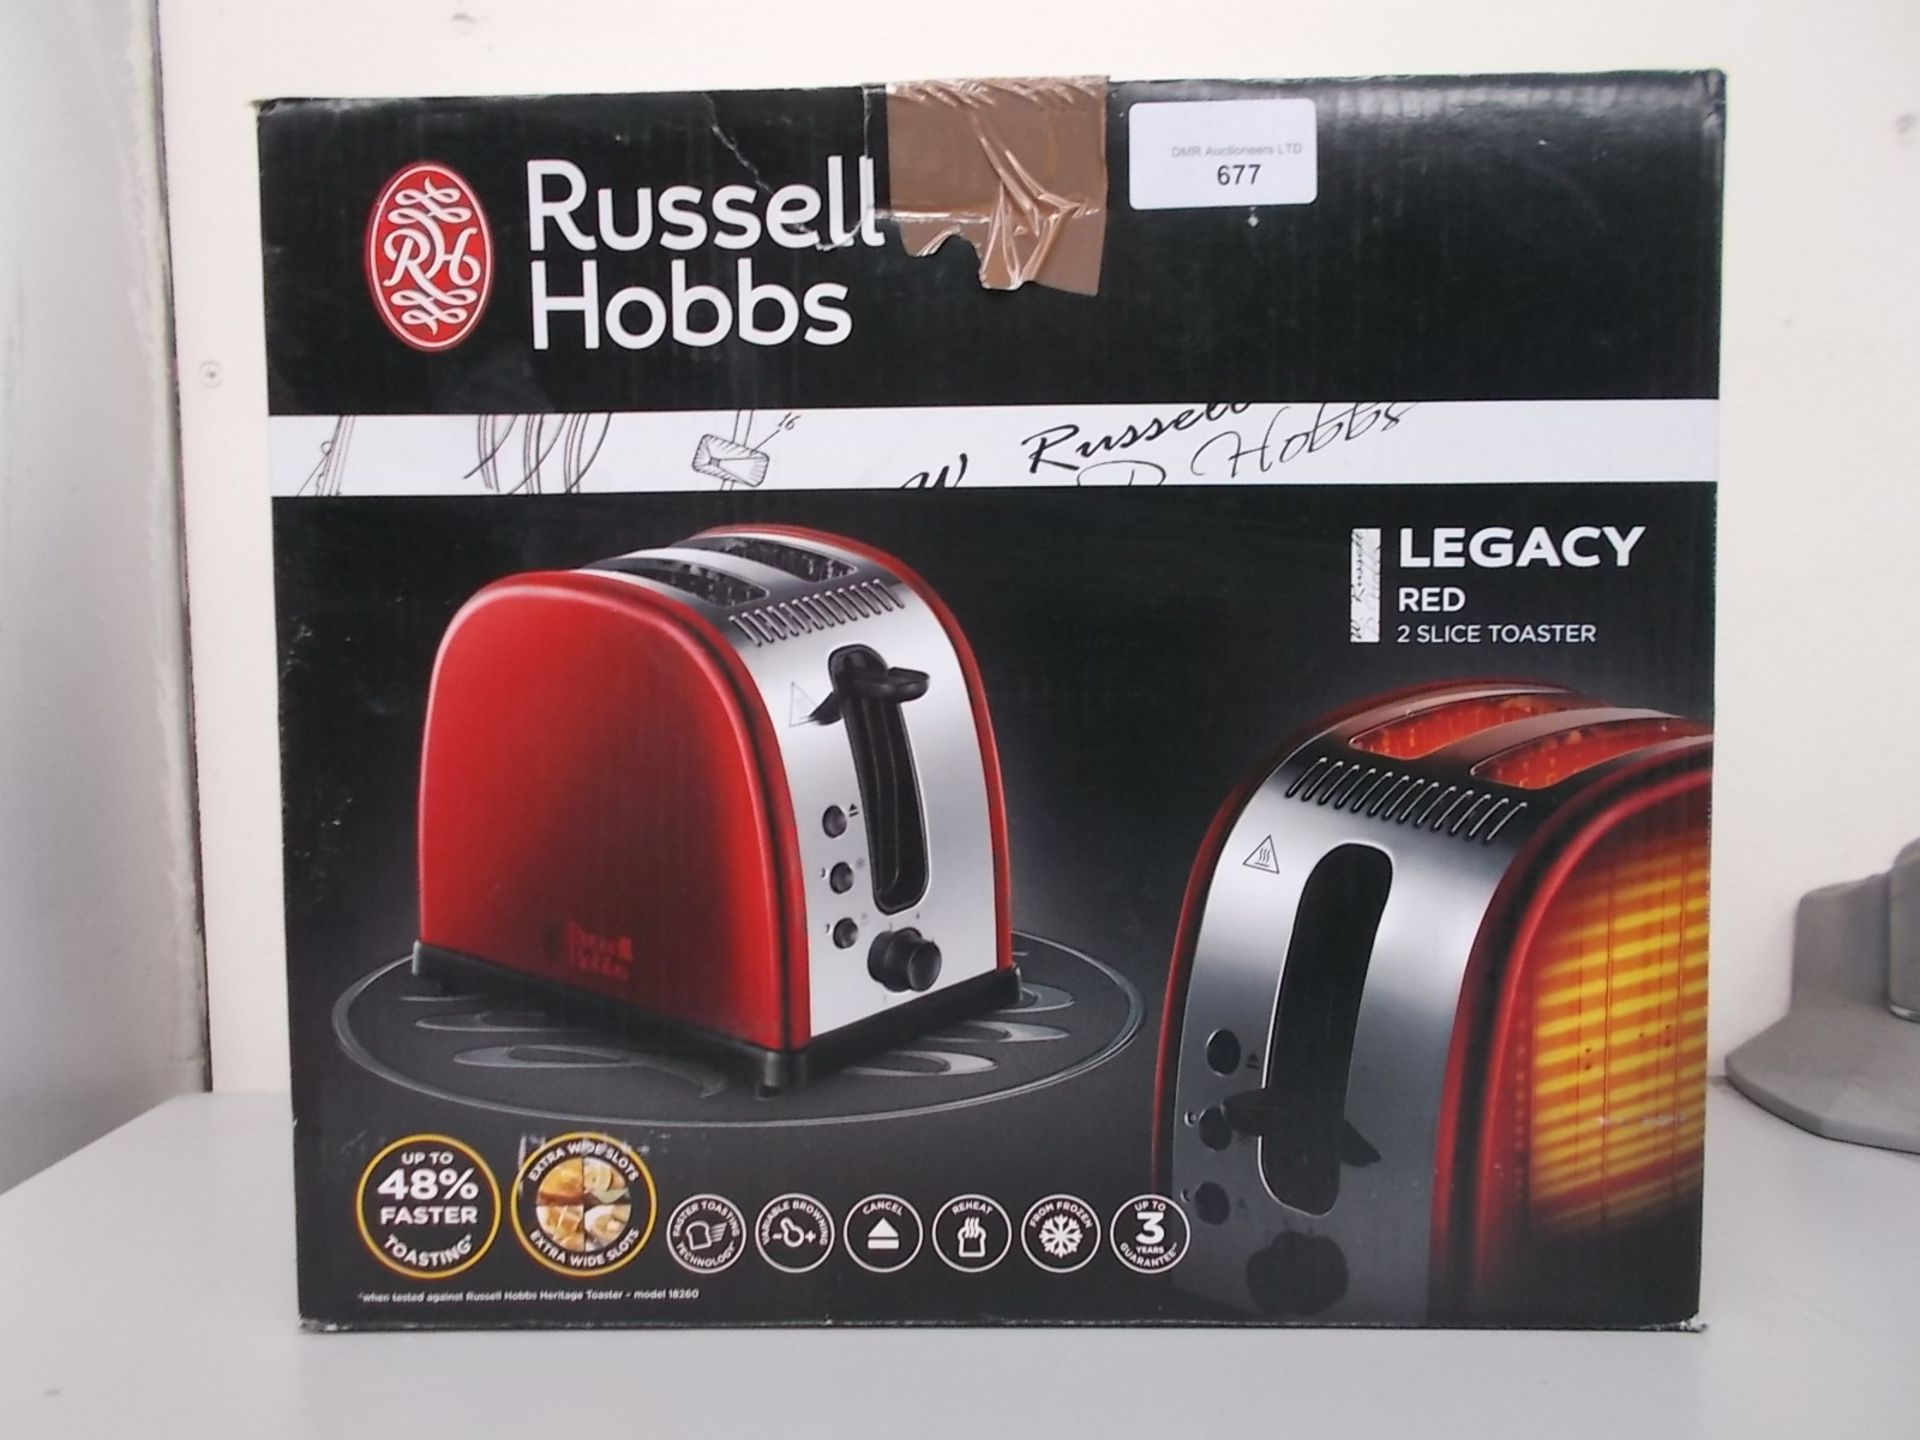 1 BOXED RUSSELL HOBBS LEGACY RED 2 SLICE TOASTER